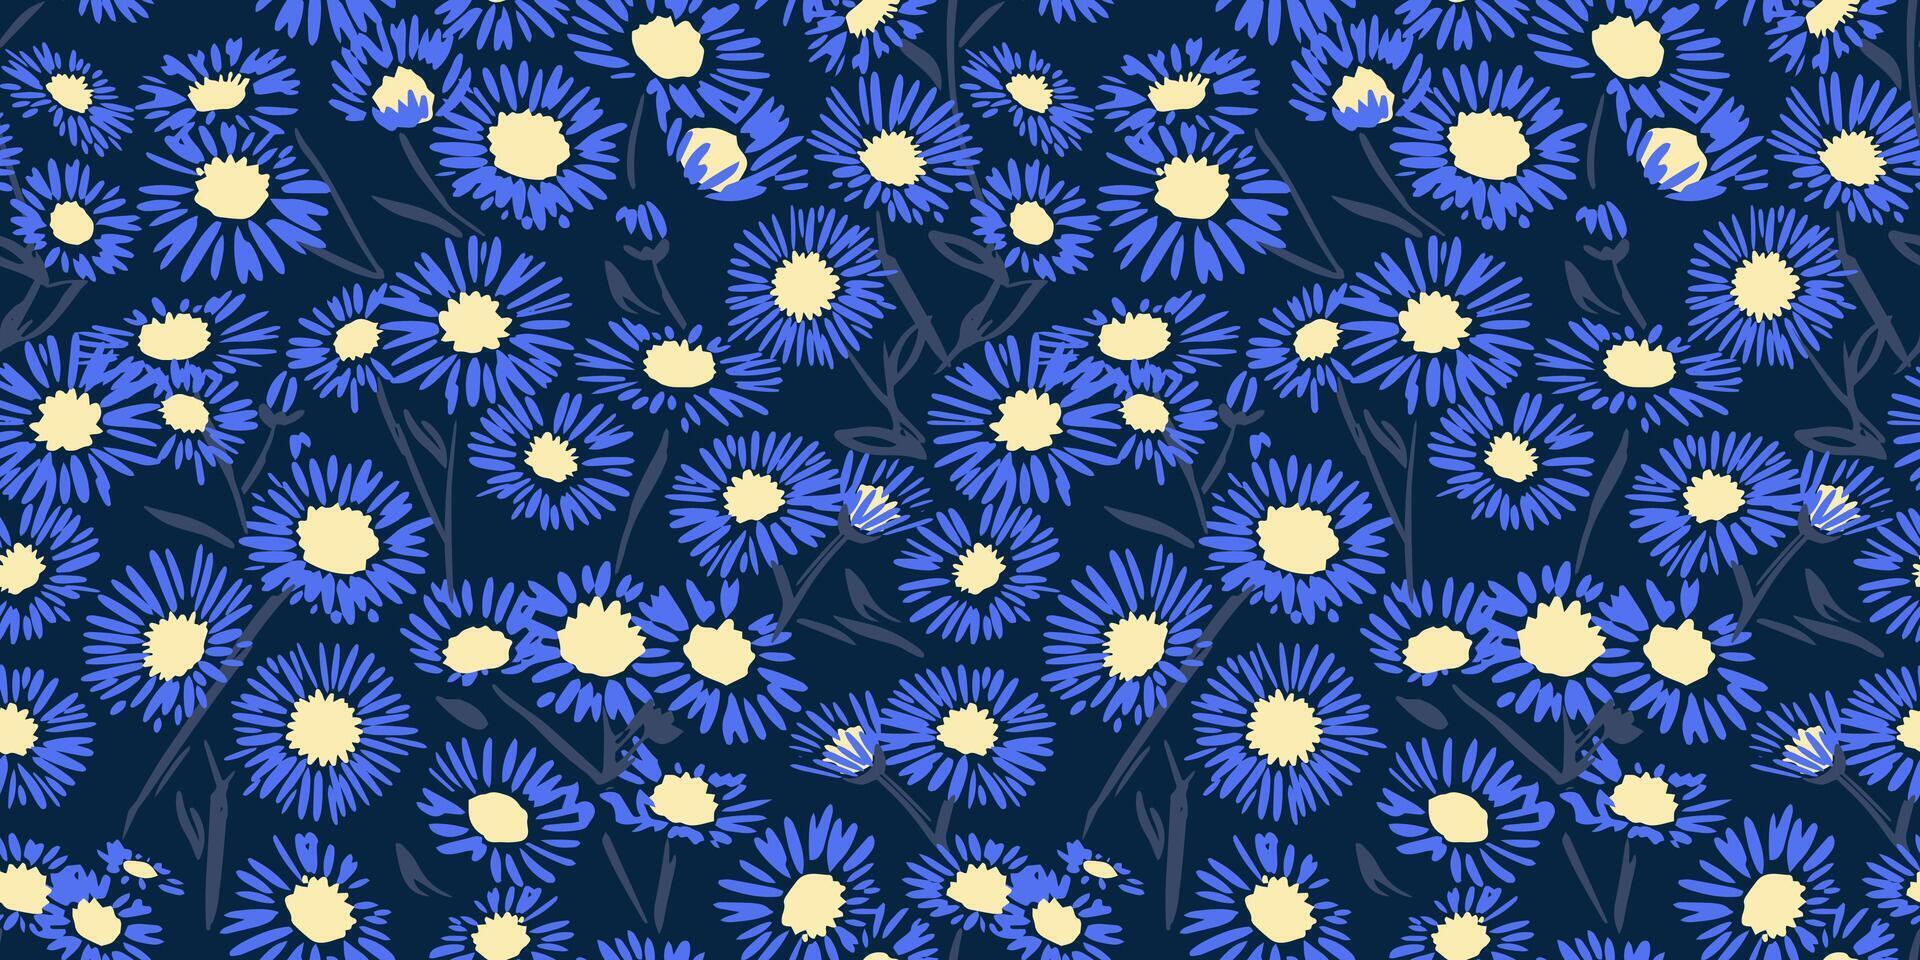 Artistic shape blue floral chamomiles seamless pattern on a dark black background. Vector hand drawn ditsy flowers. Vibrant retro print collage. Design ornament for fashion, fabric, interior, textile